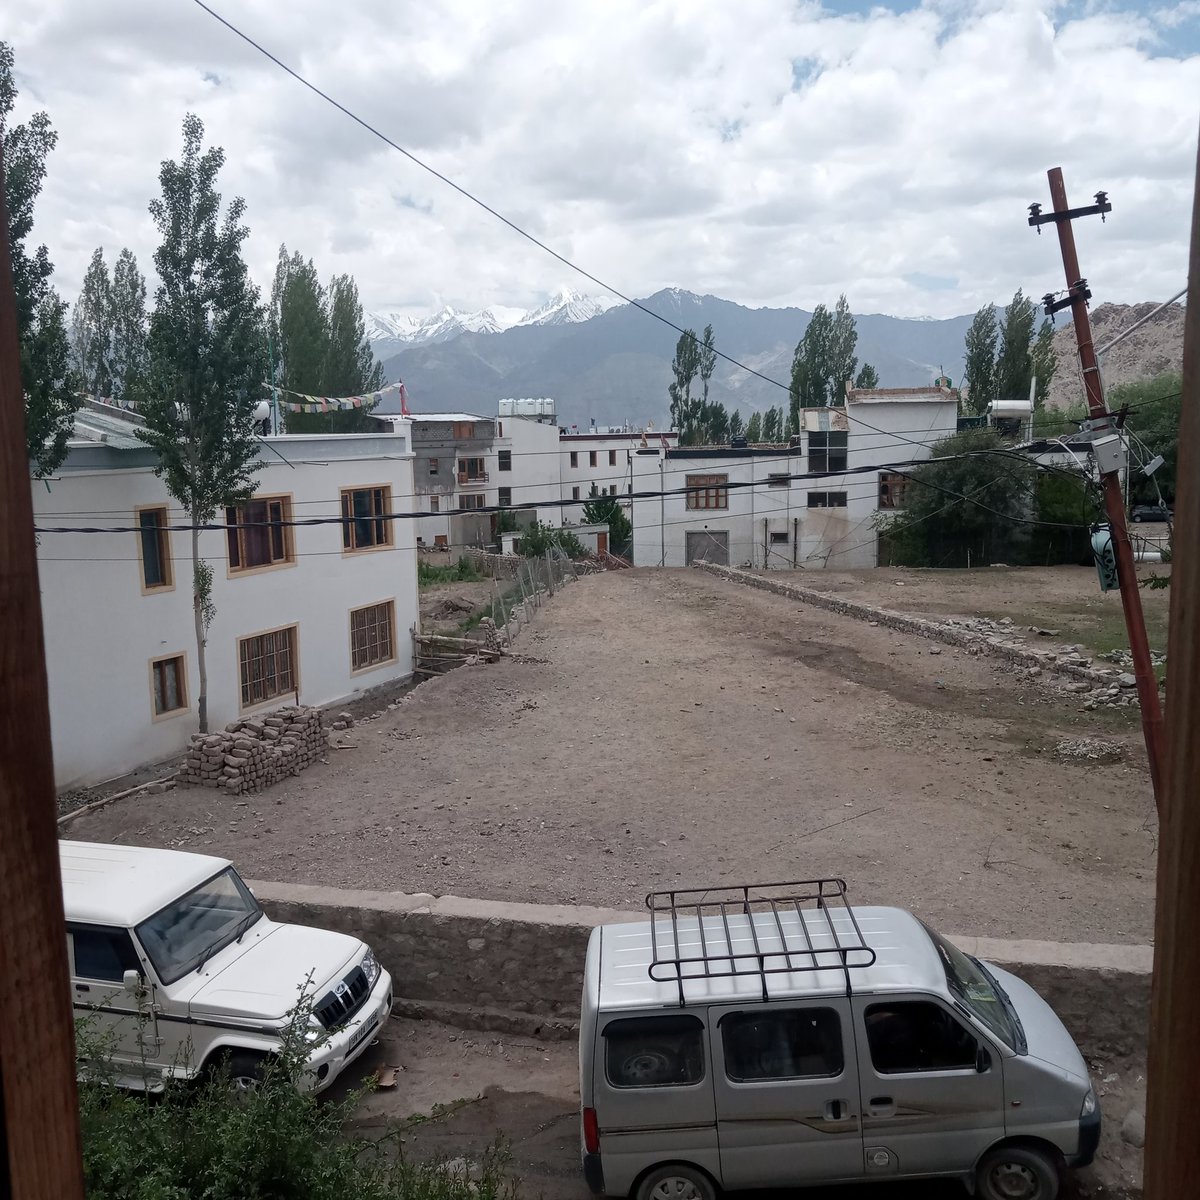 View from Chandan guesthouse, Leh, Ladakh. 3500 m ASL.
Annual suffocation excercise has just begun.